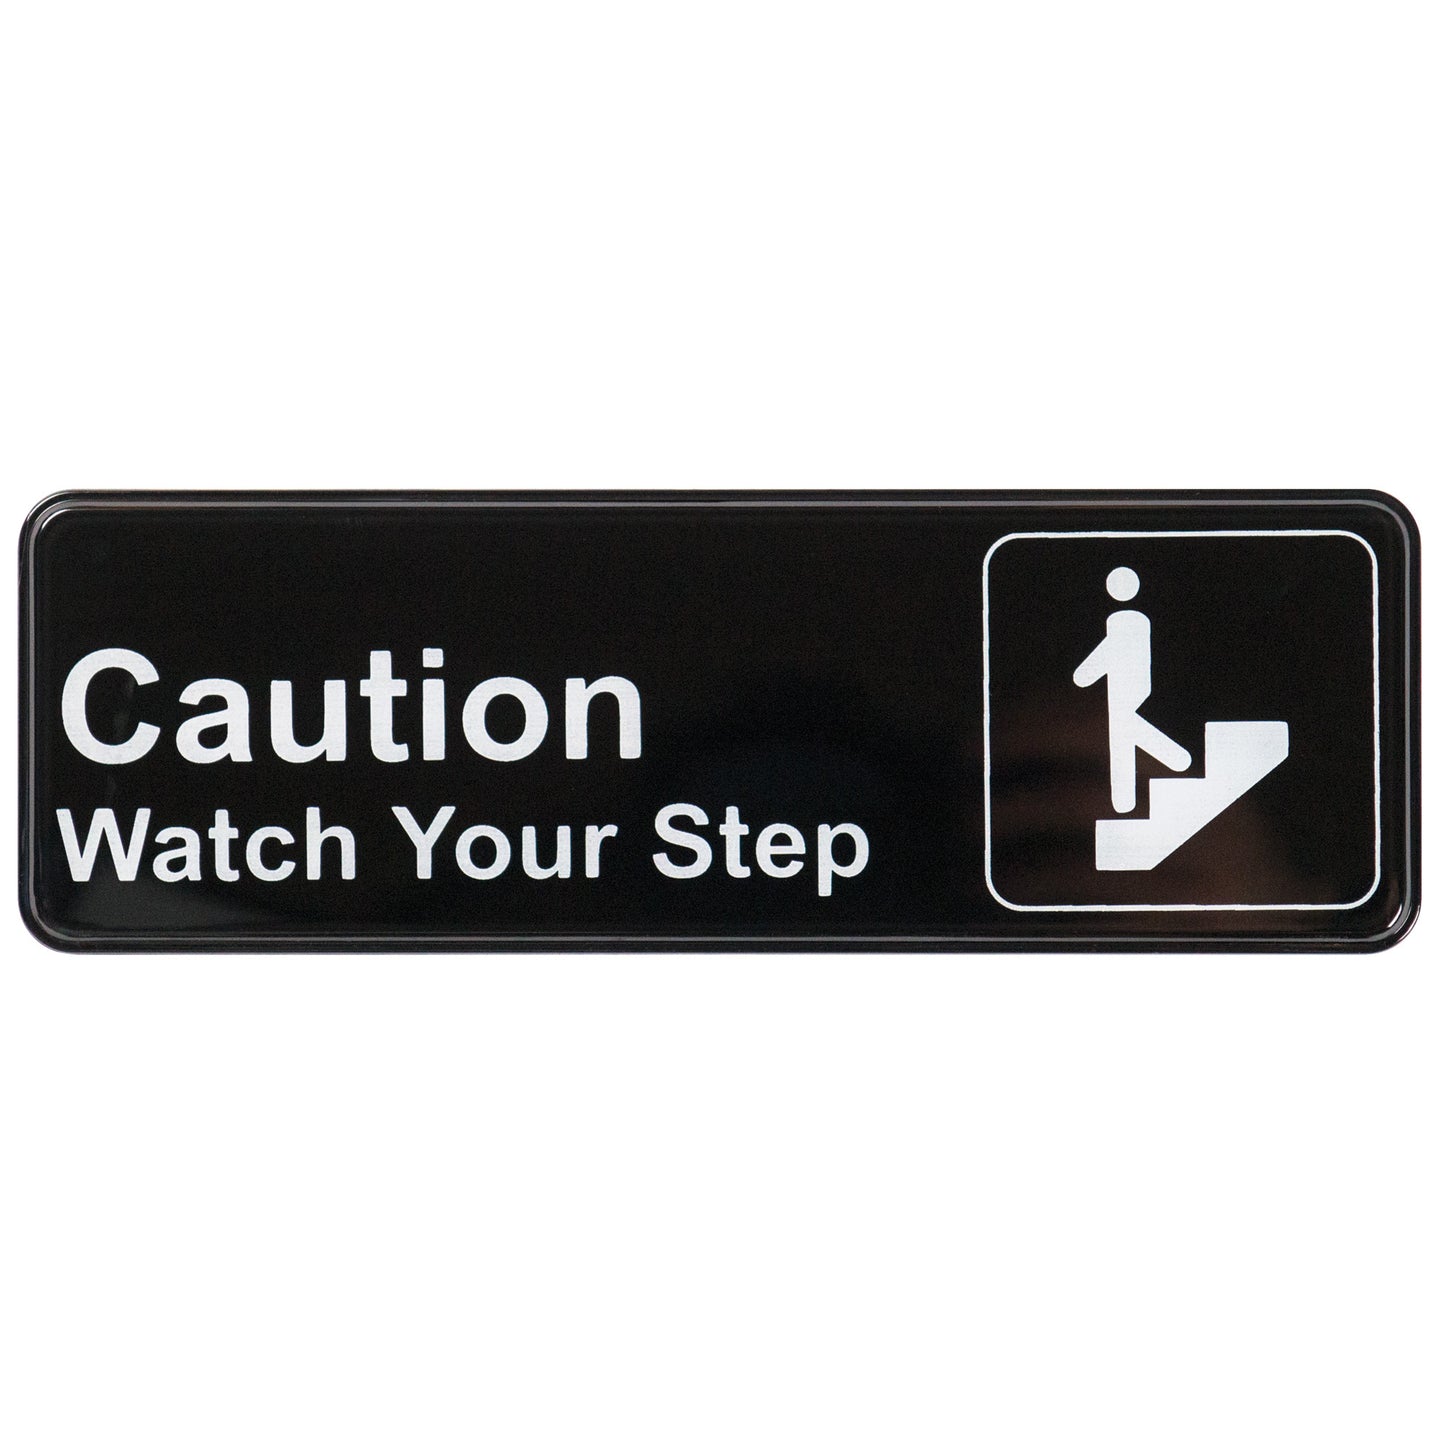 SGN-326 - Information Signs, 9"W x 3"H - SGN-326 - Caution/Watch Your Step